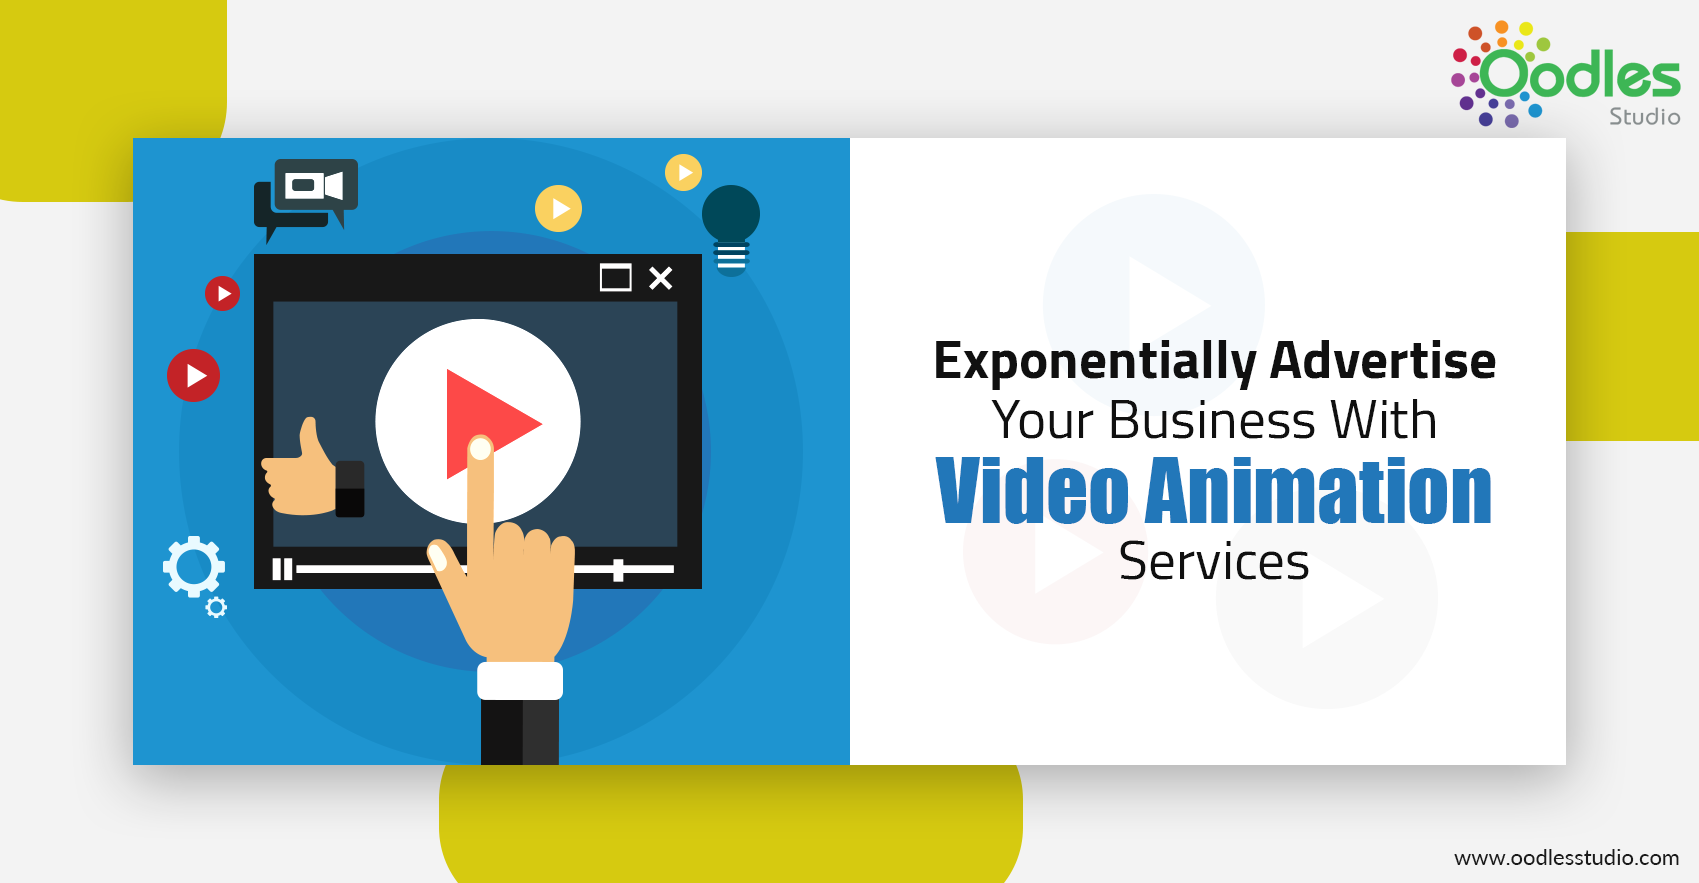 Exponentially Advertise Your Business With Video Animation Services